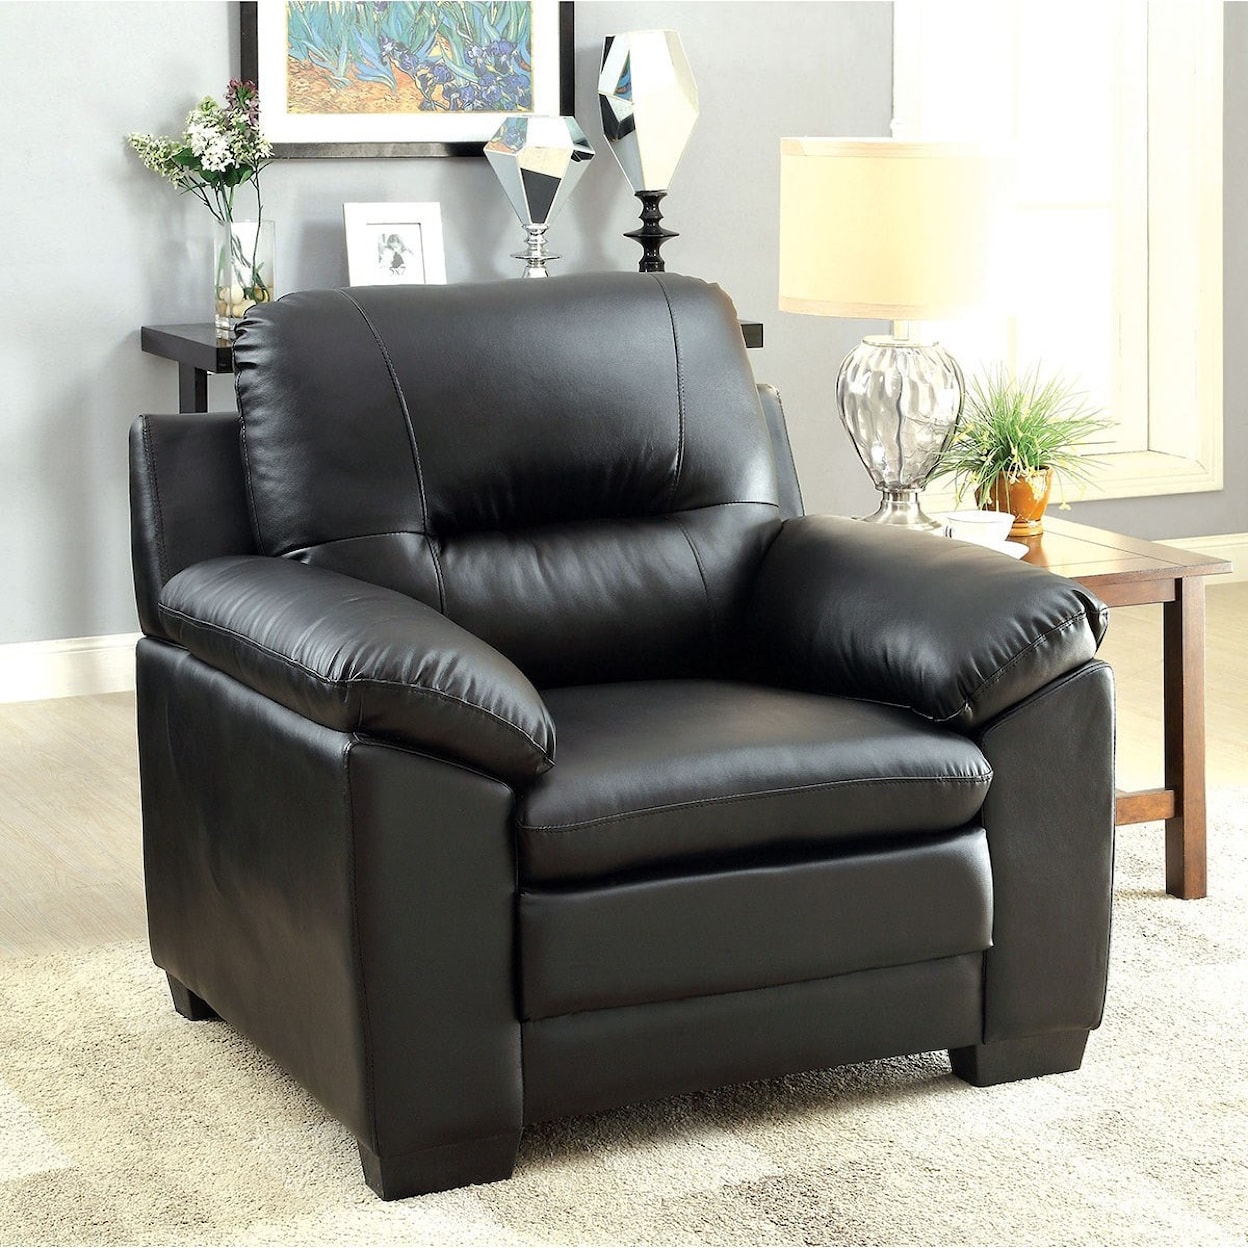 Furniture of America Parma Casual Chair